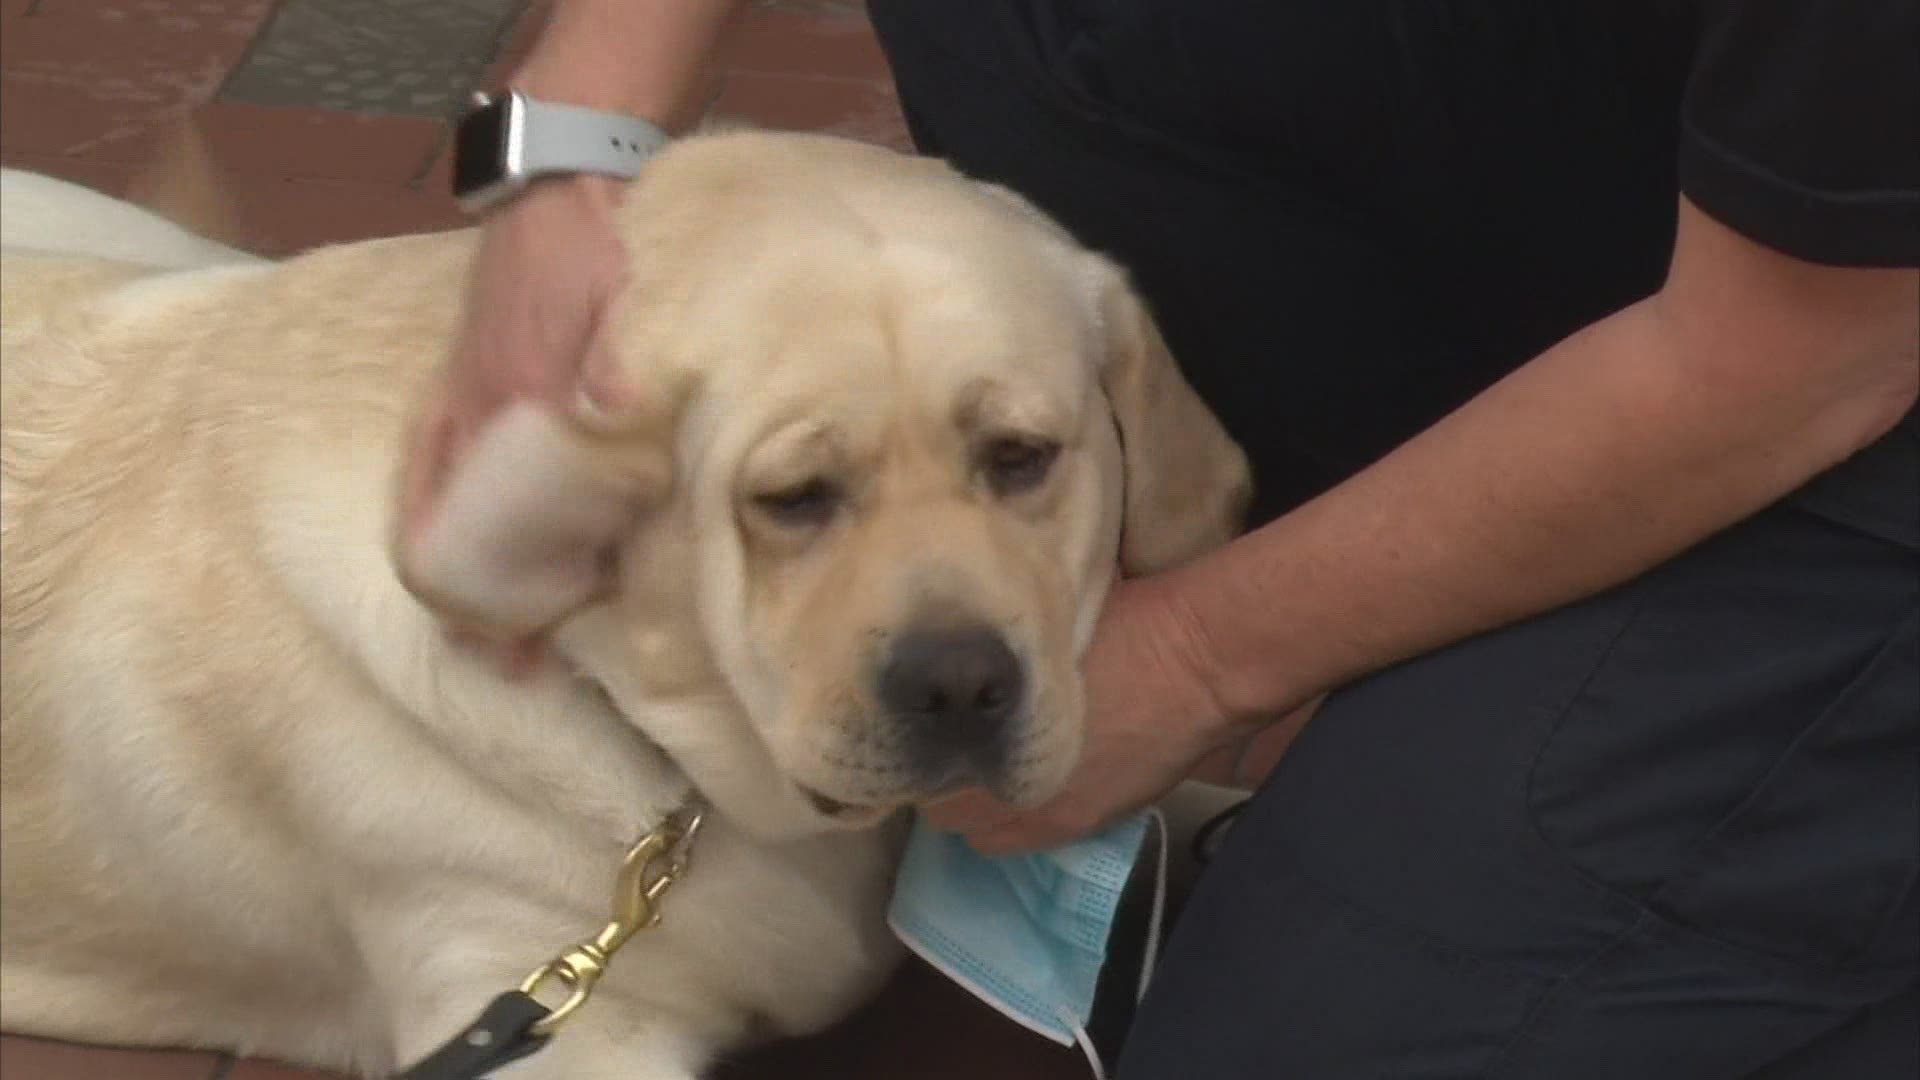 Chloe is the department's first therapy K-9 and used for community outreach programs.